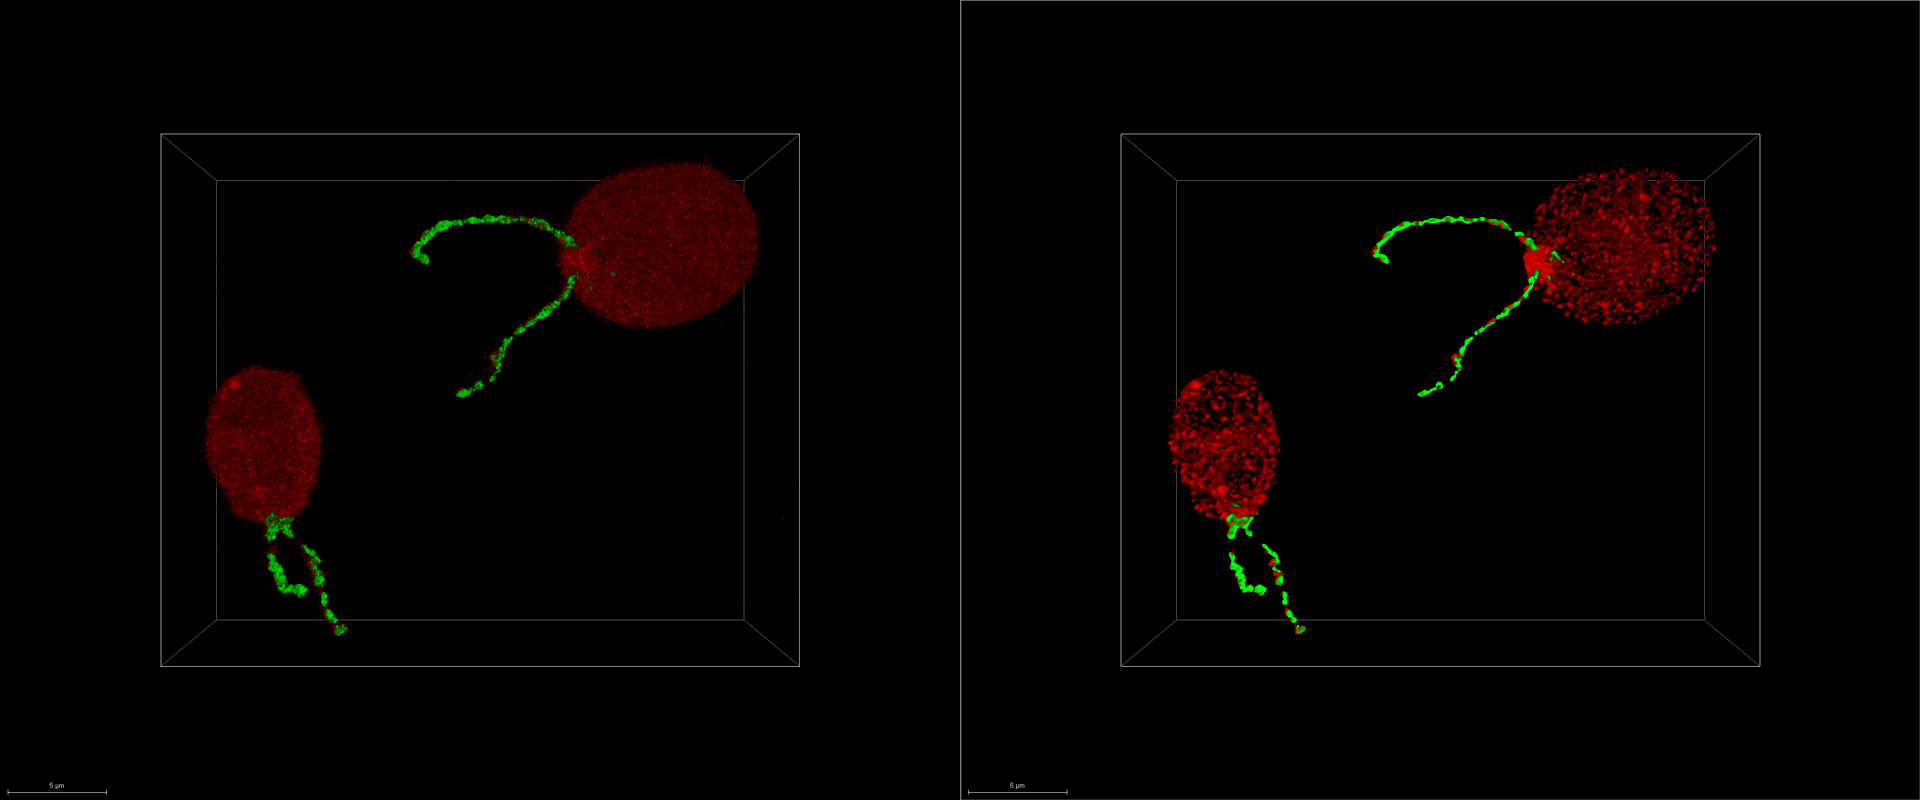 Chlamydomonas reinhardtii, two different types of intraflagellar transport proteins, IFT-NeonGreen and IFT-mCherry. Samples kindly provided by the Pigino-Lab, Max-Planck Institute of Molecular Cell Biology and Genetics, Dresden, Germany.